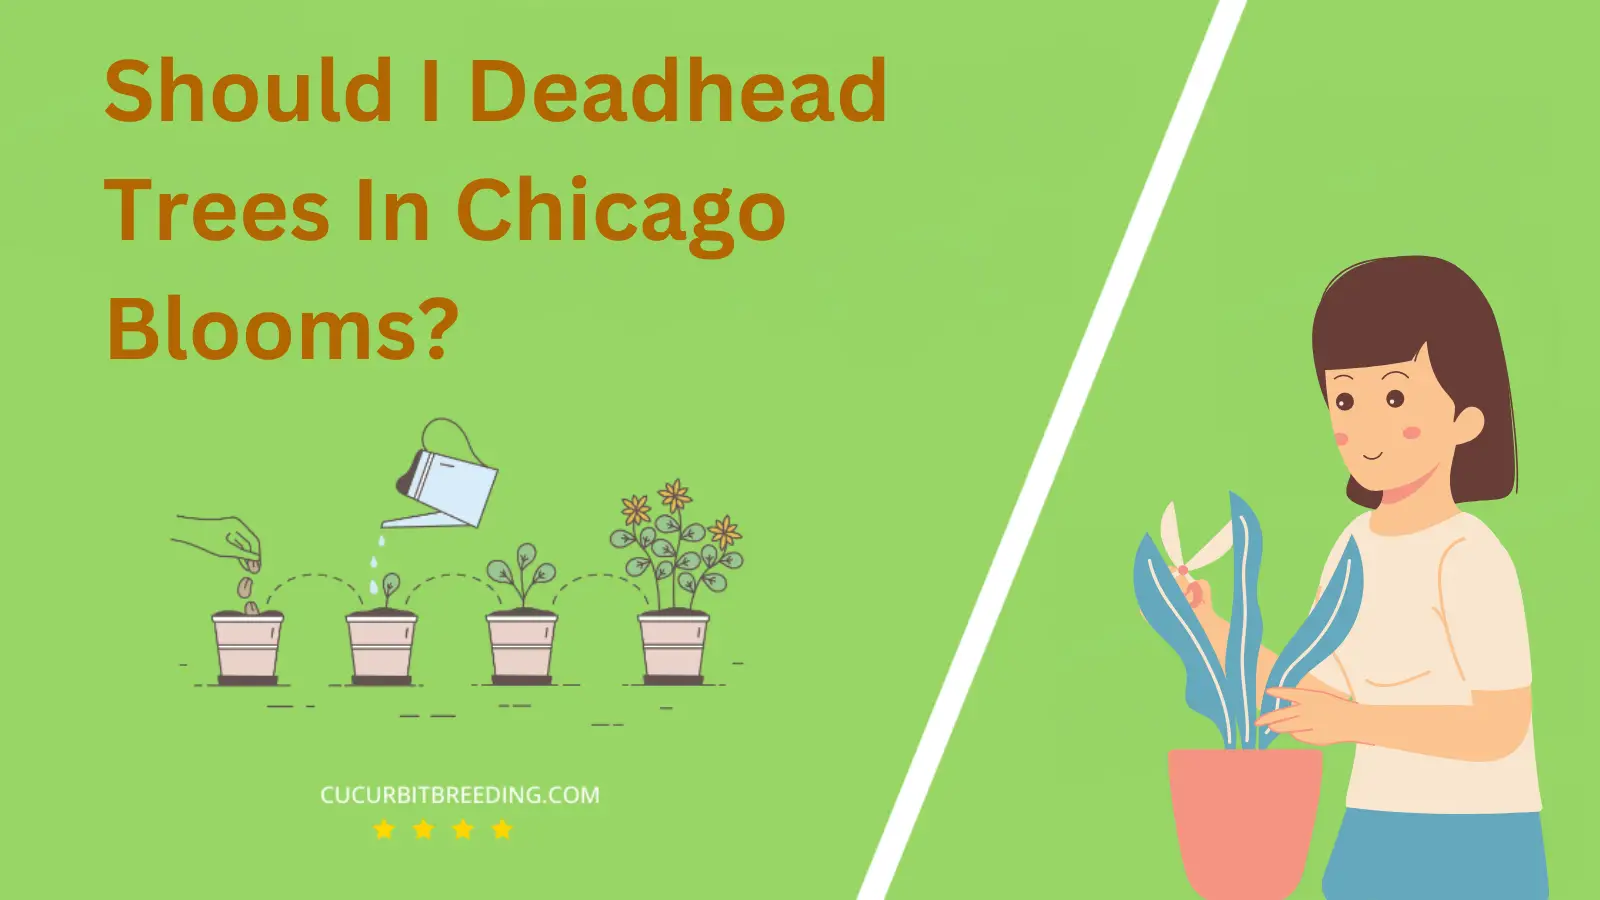 Should I Deadhead Trees In Chicago Blooms?